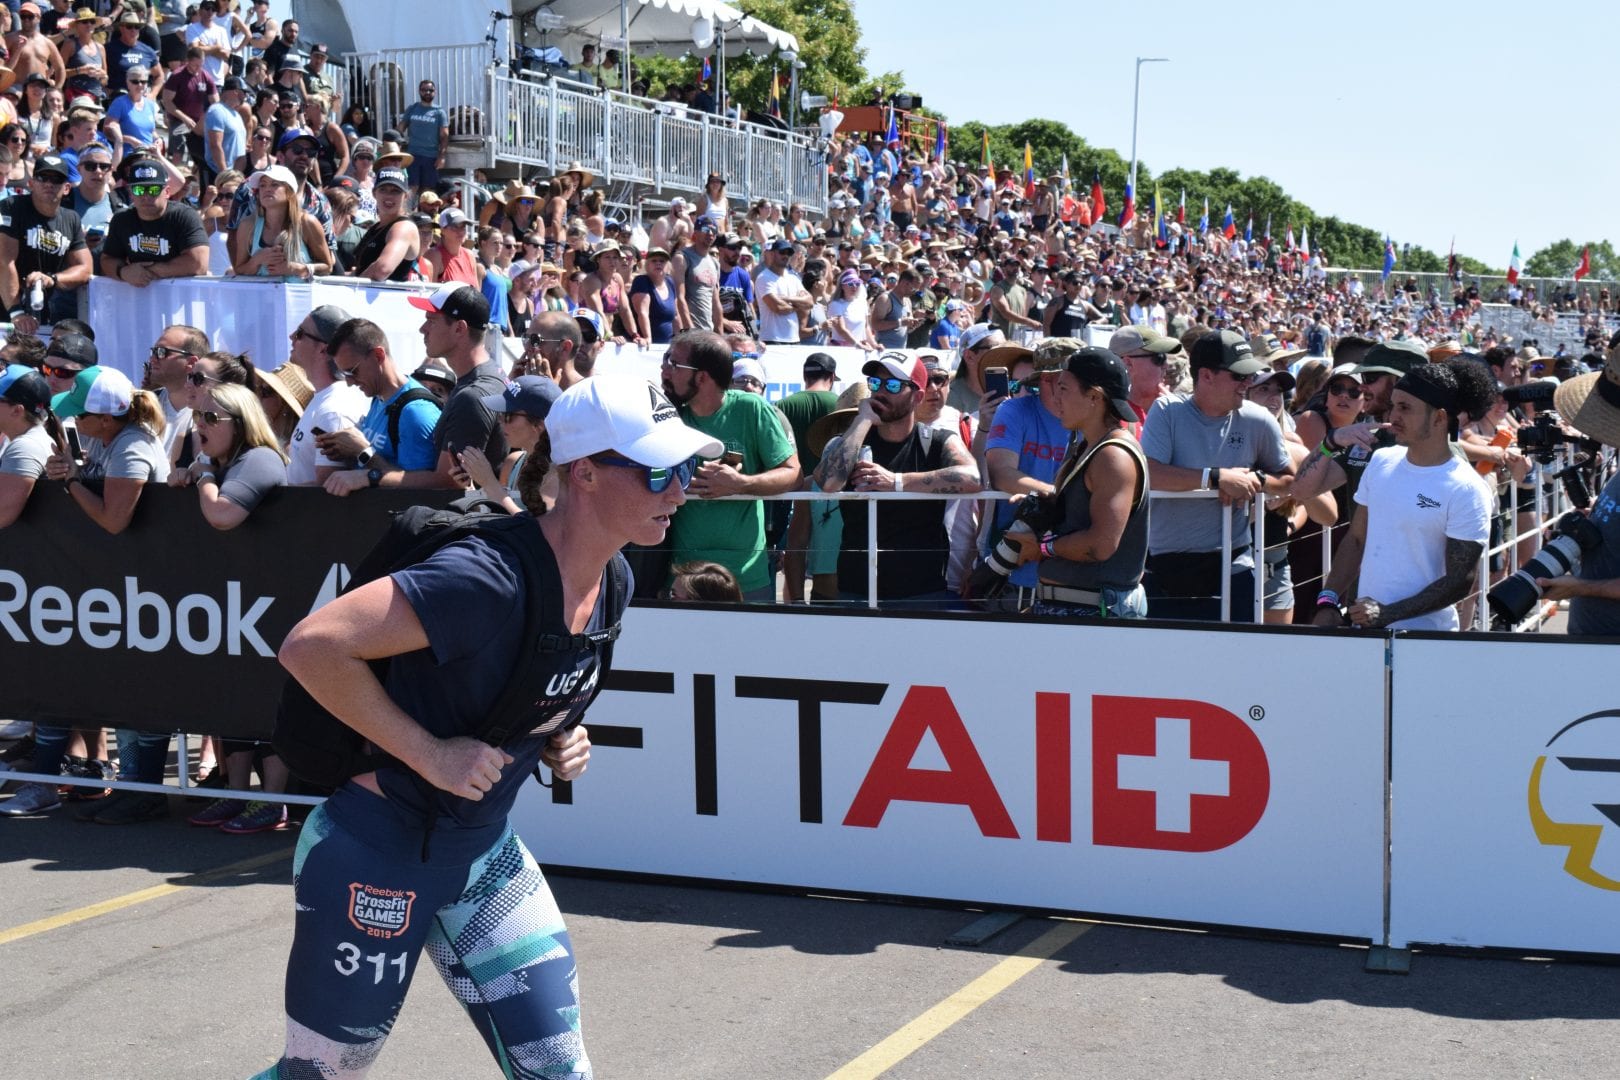 Lindsay Vaughan completes the Ruck Run event at the 2019 CrossFit Games